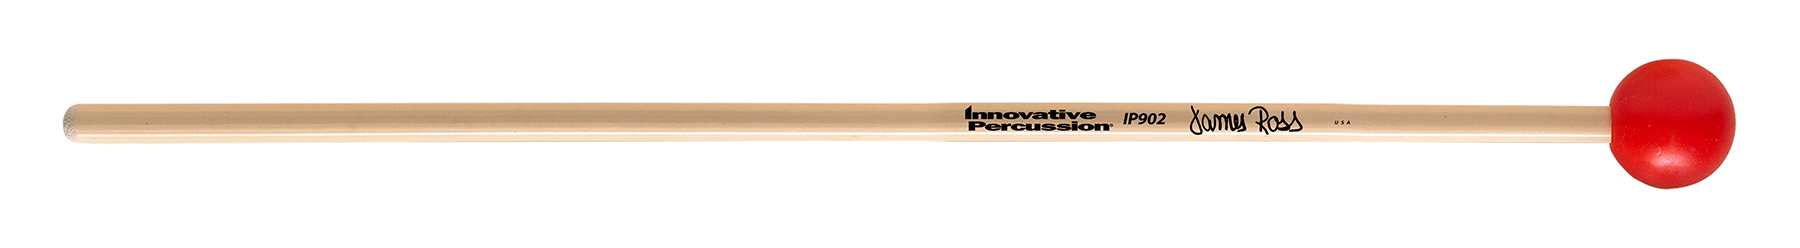 Innovative Percussion IP902 James Ross Mallet